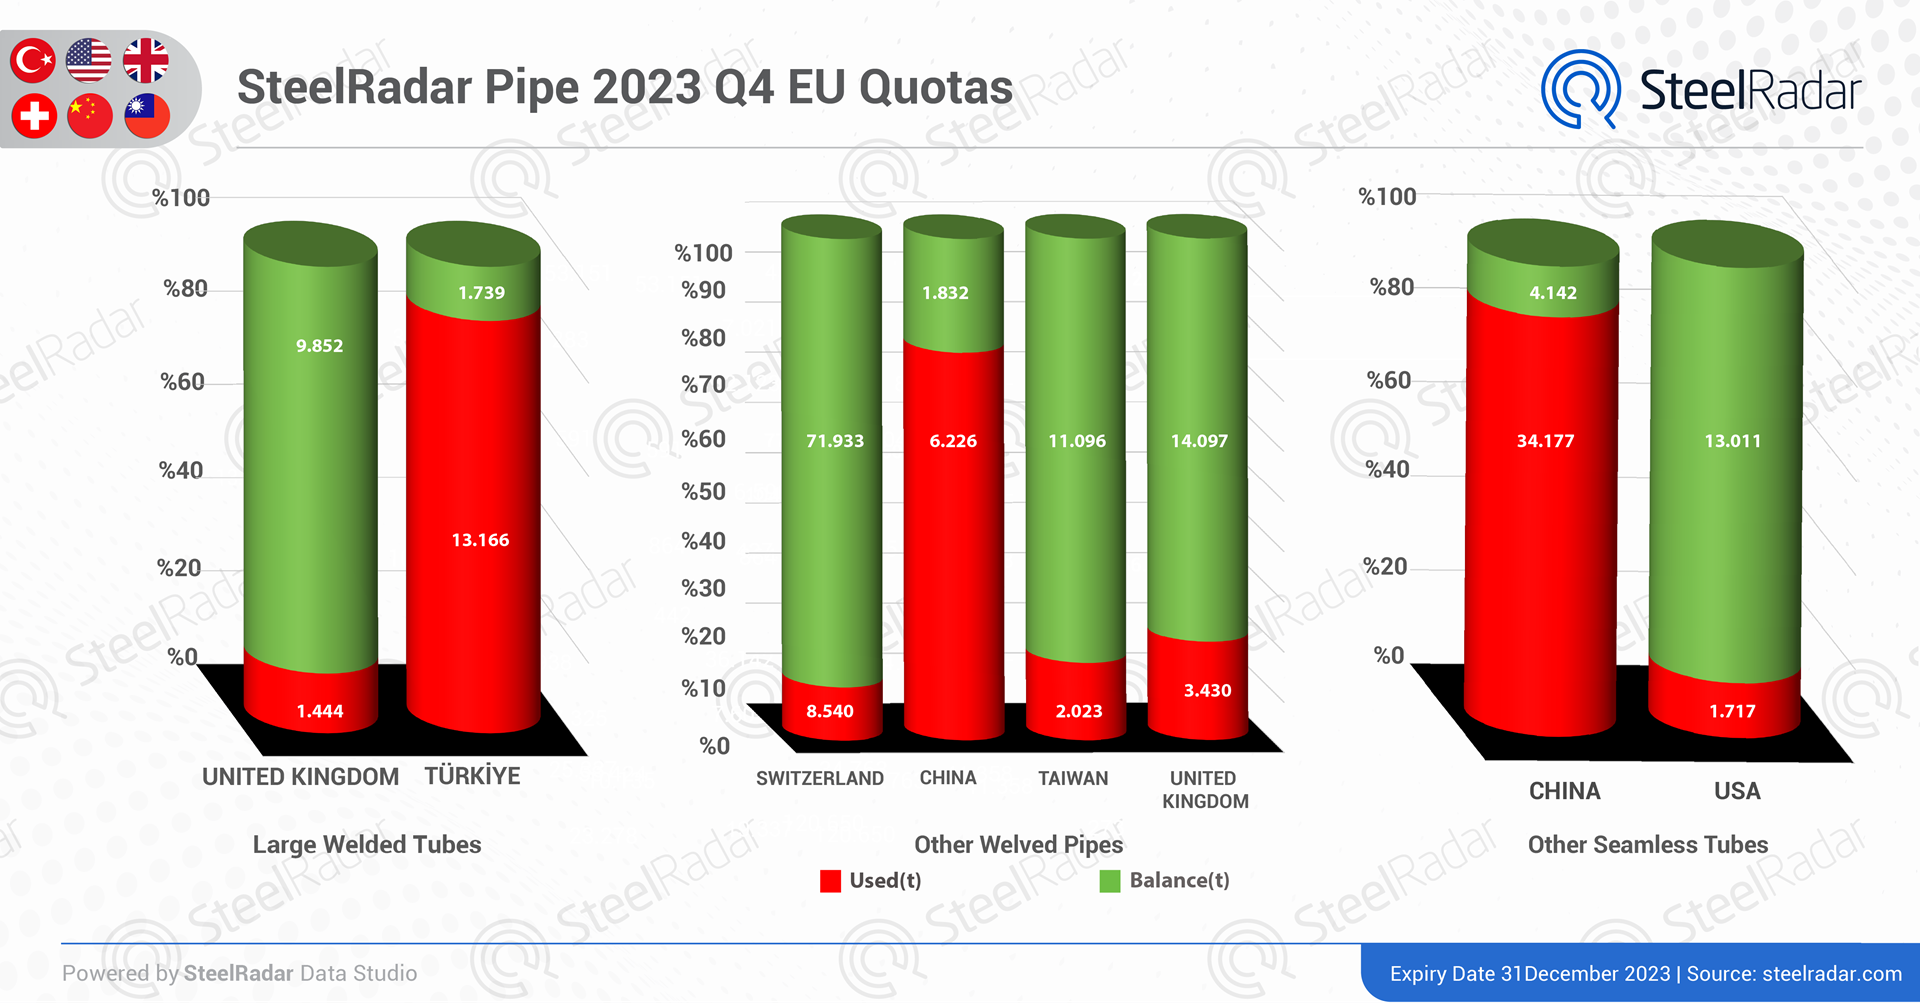 Inter-country competition and quotas in the steel pipe sector